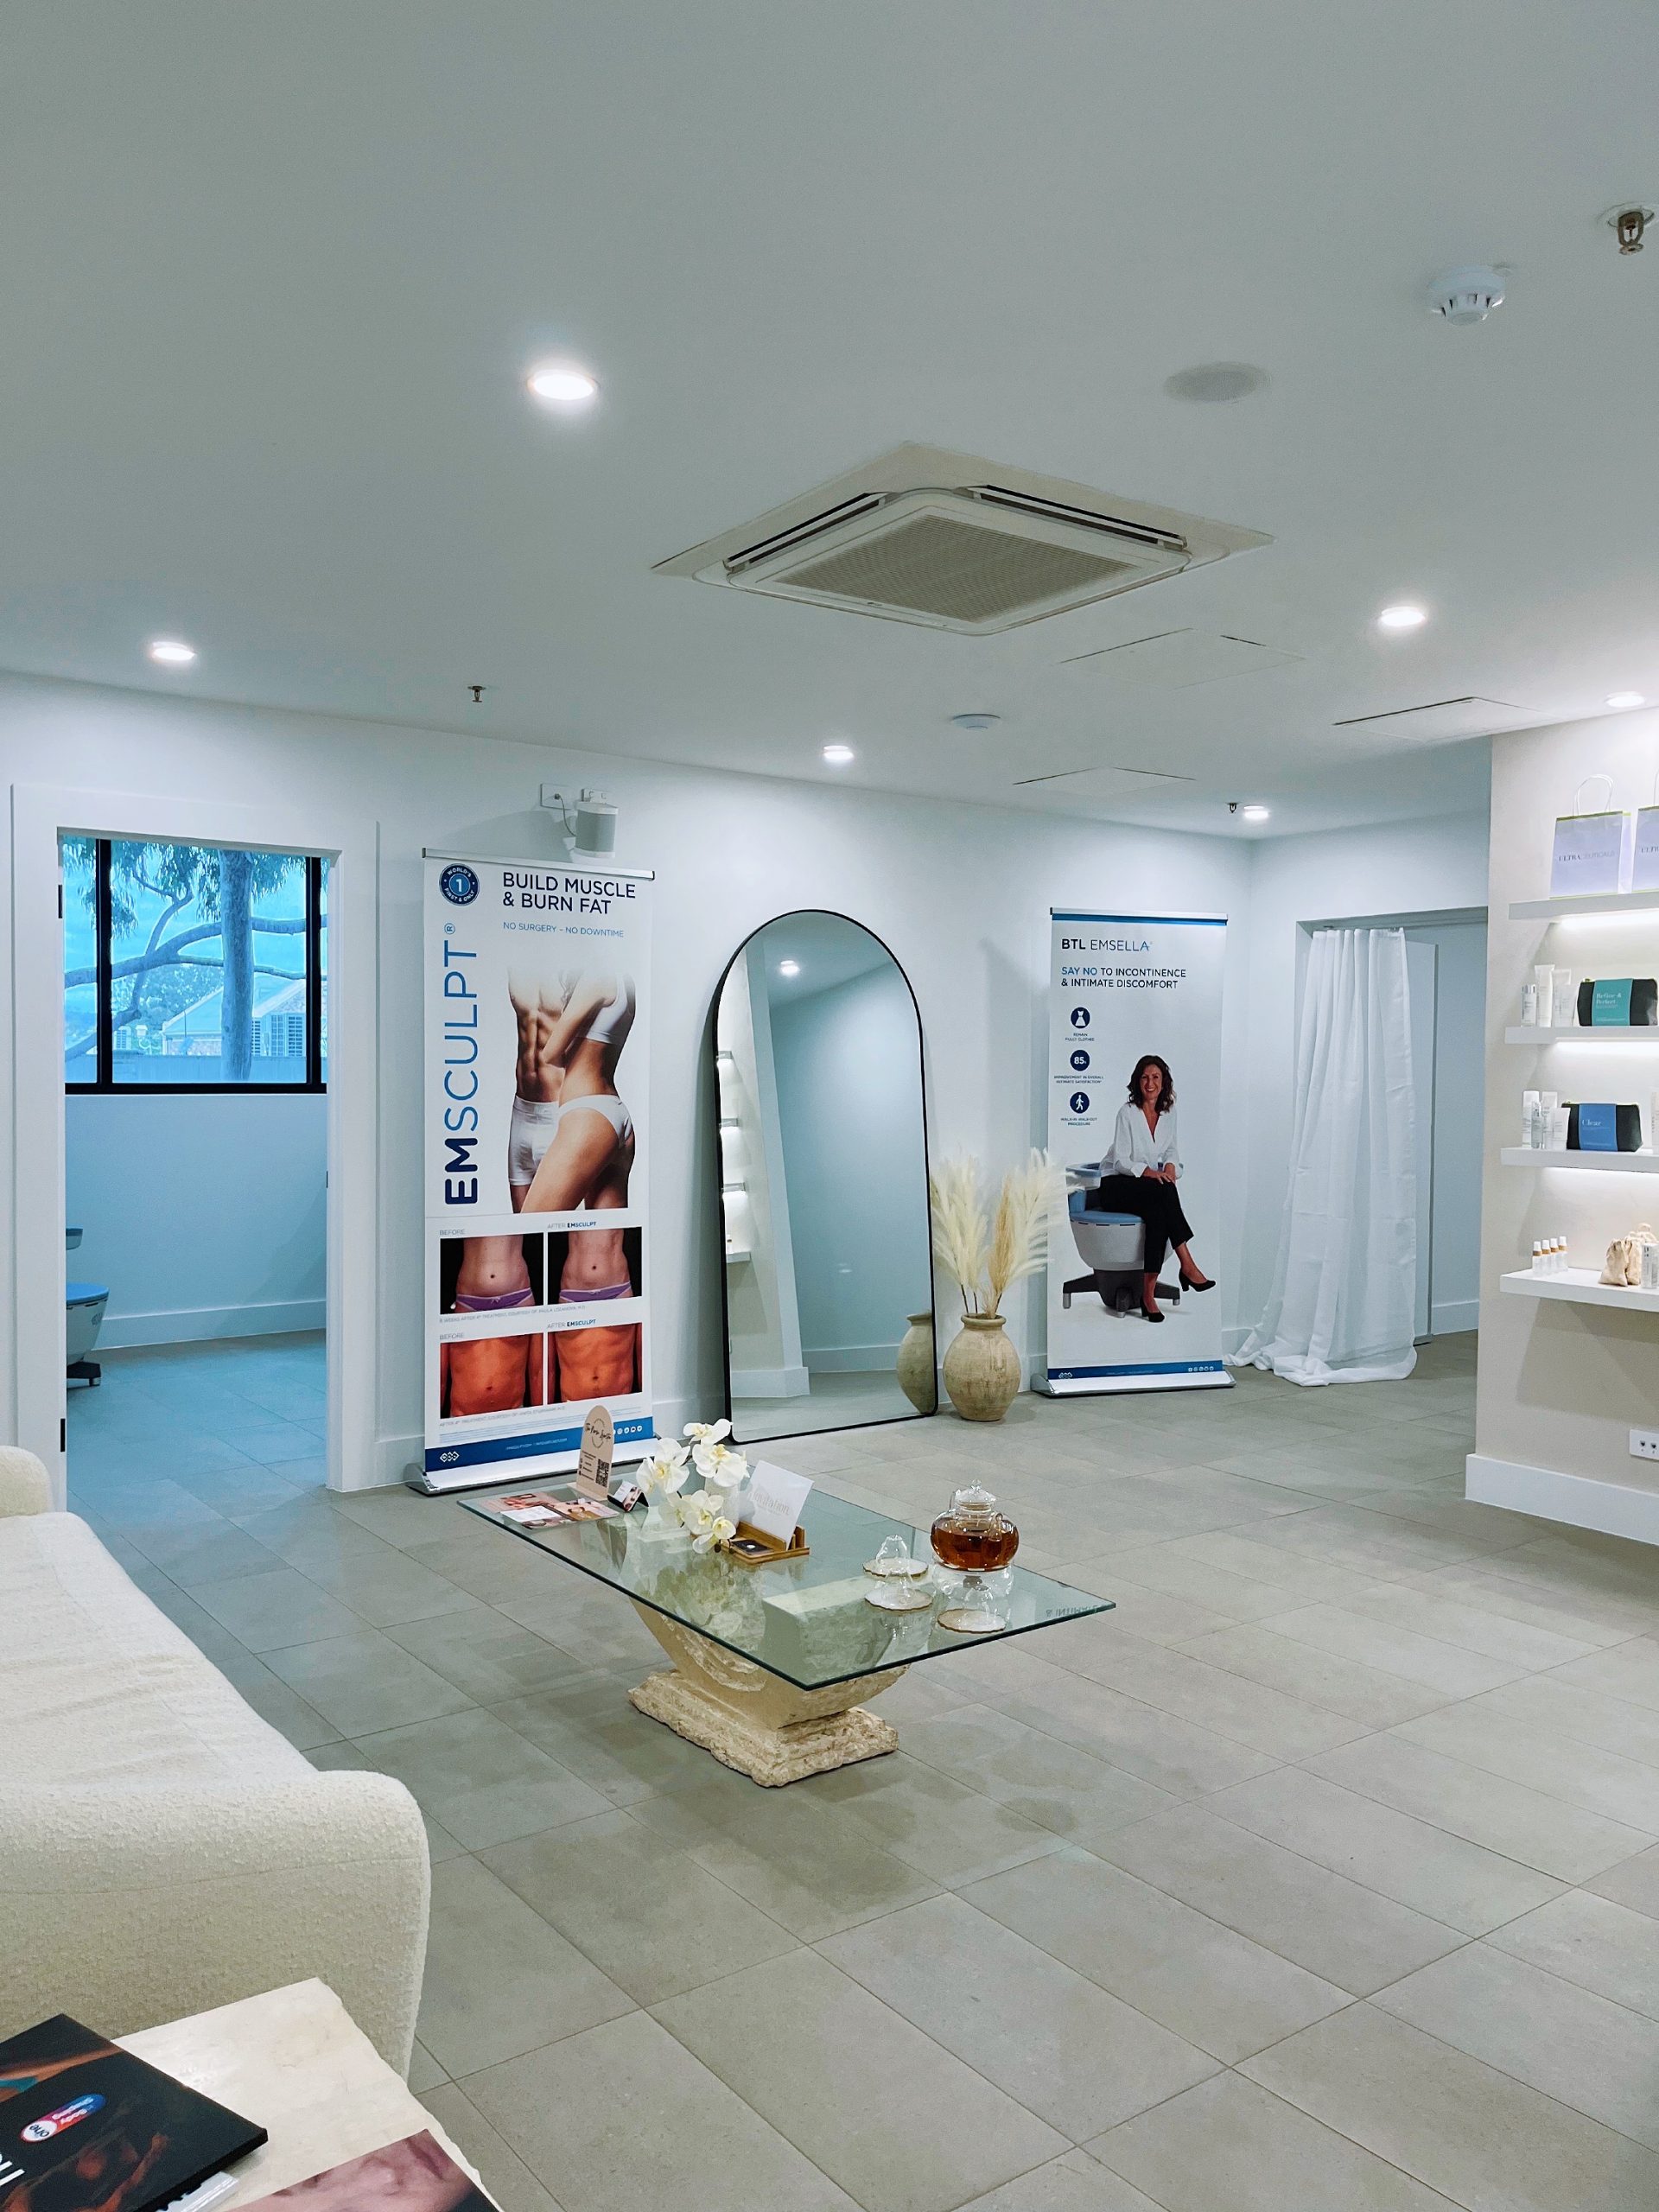 WIN a treatment of your choice for you and your bestie at Pulse Body Rejuvenation!